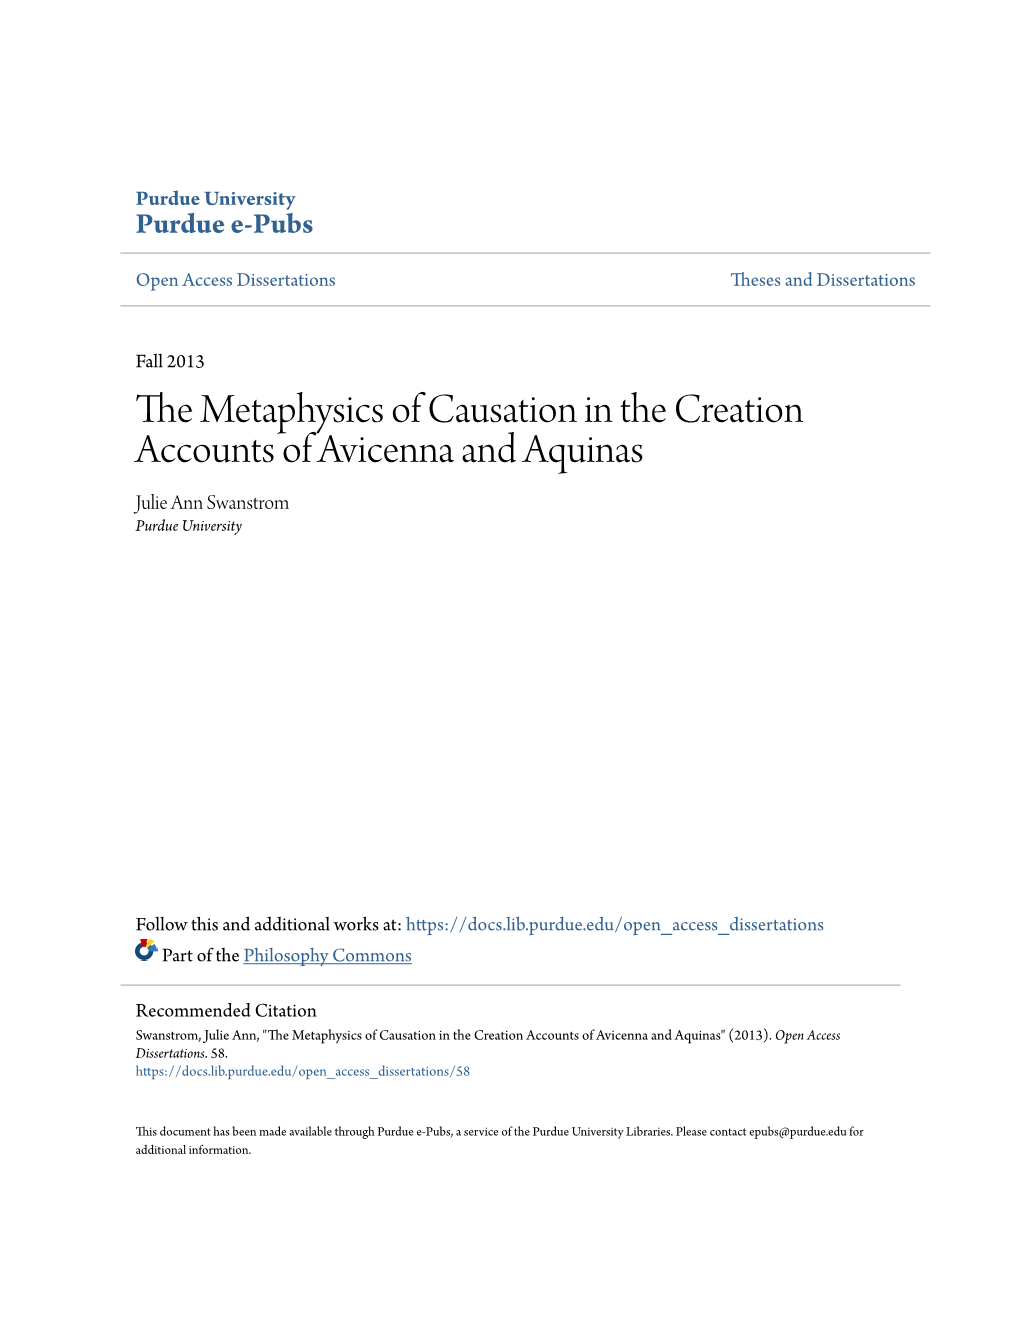 The Metaphysics of Causation in the Creation Accounts of Avicenna and Aquinas